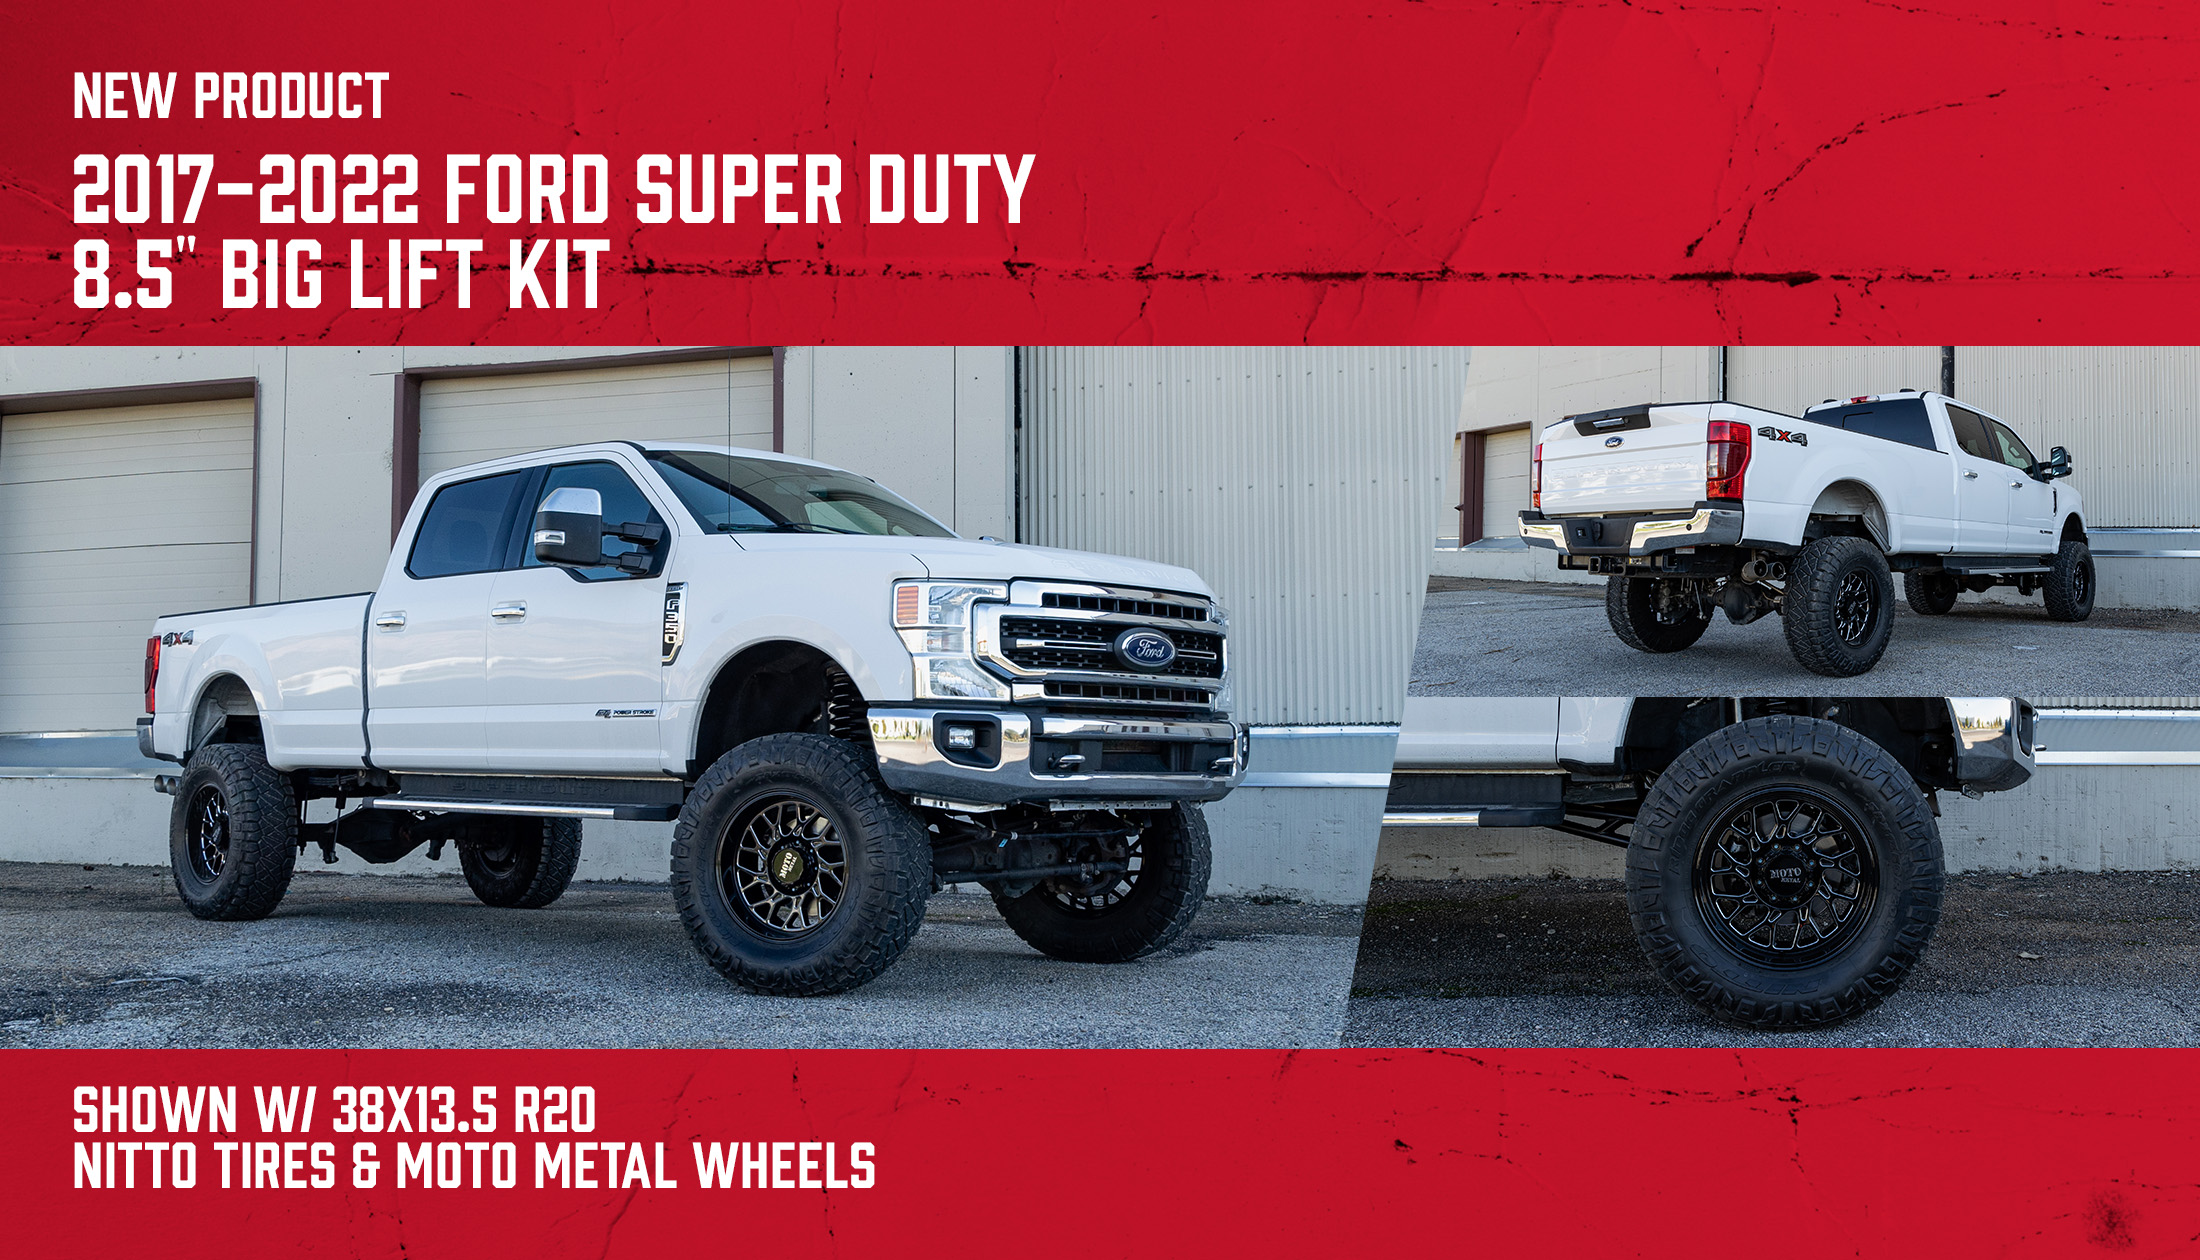 2017-2022 Ford Super Duty F250/F350 Diesel 4WD 8.5" Coil Spring Lift Kits Now Available